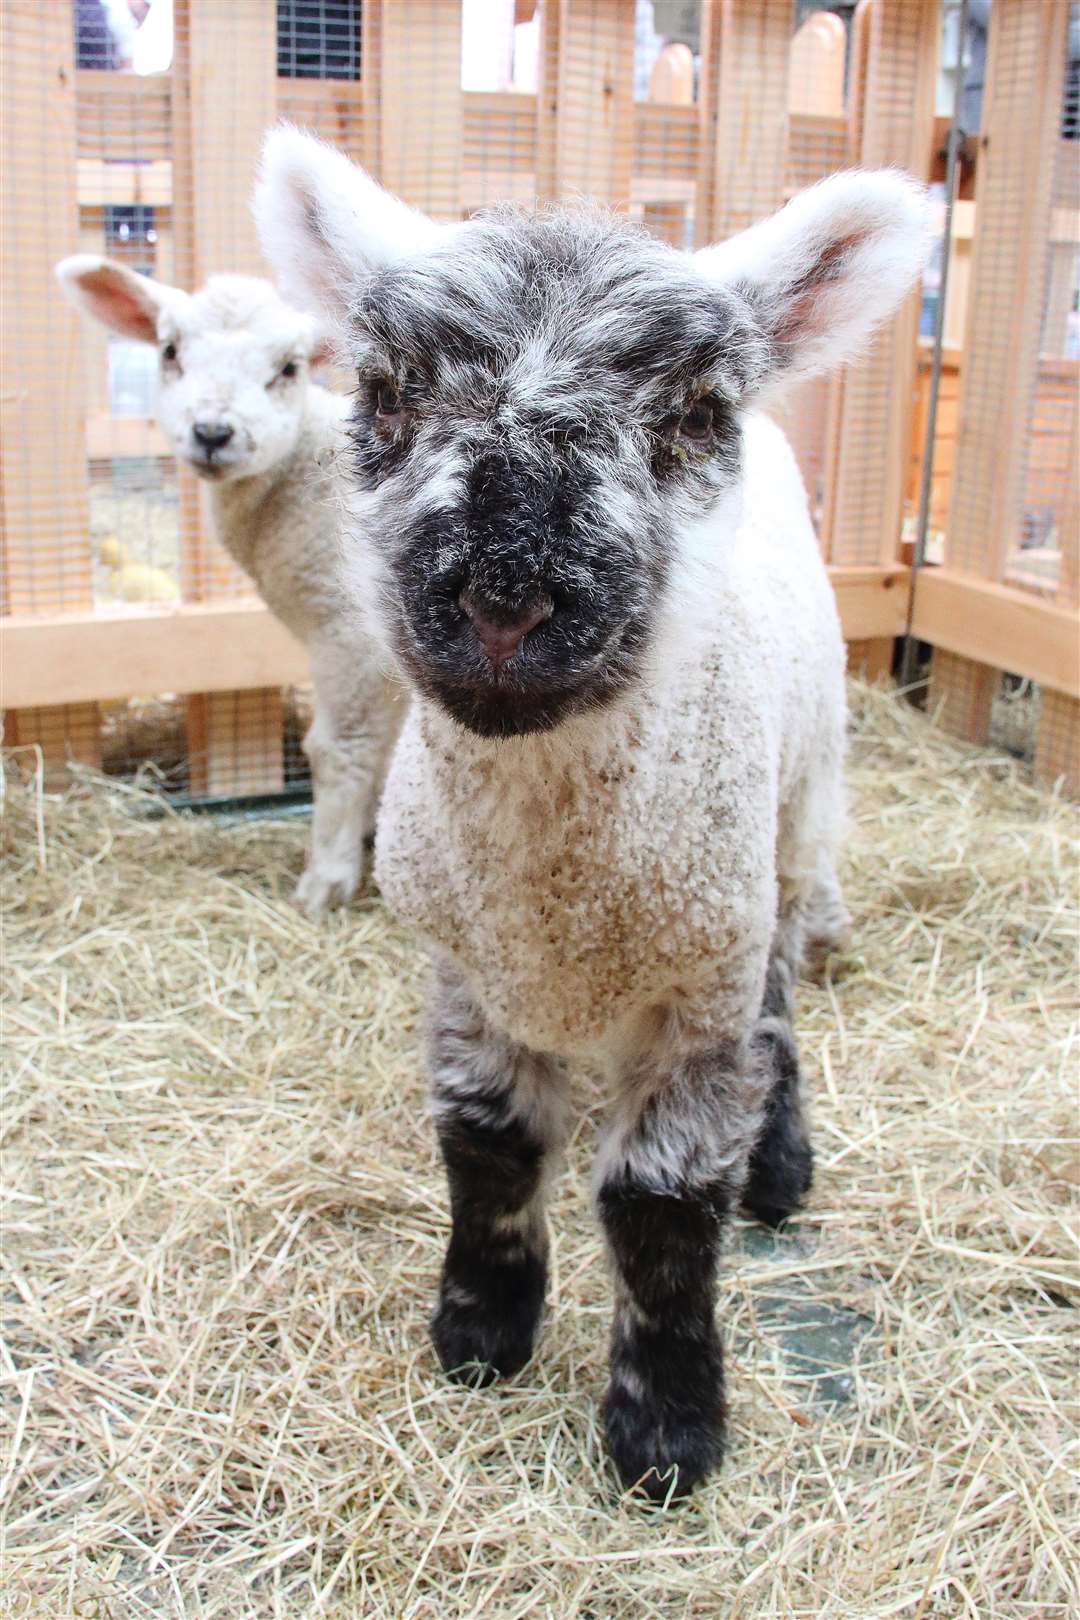 See the newborn lambs this weekend